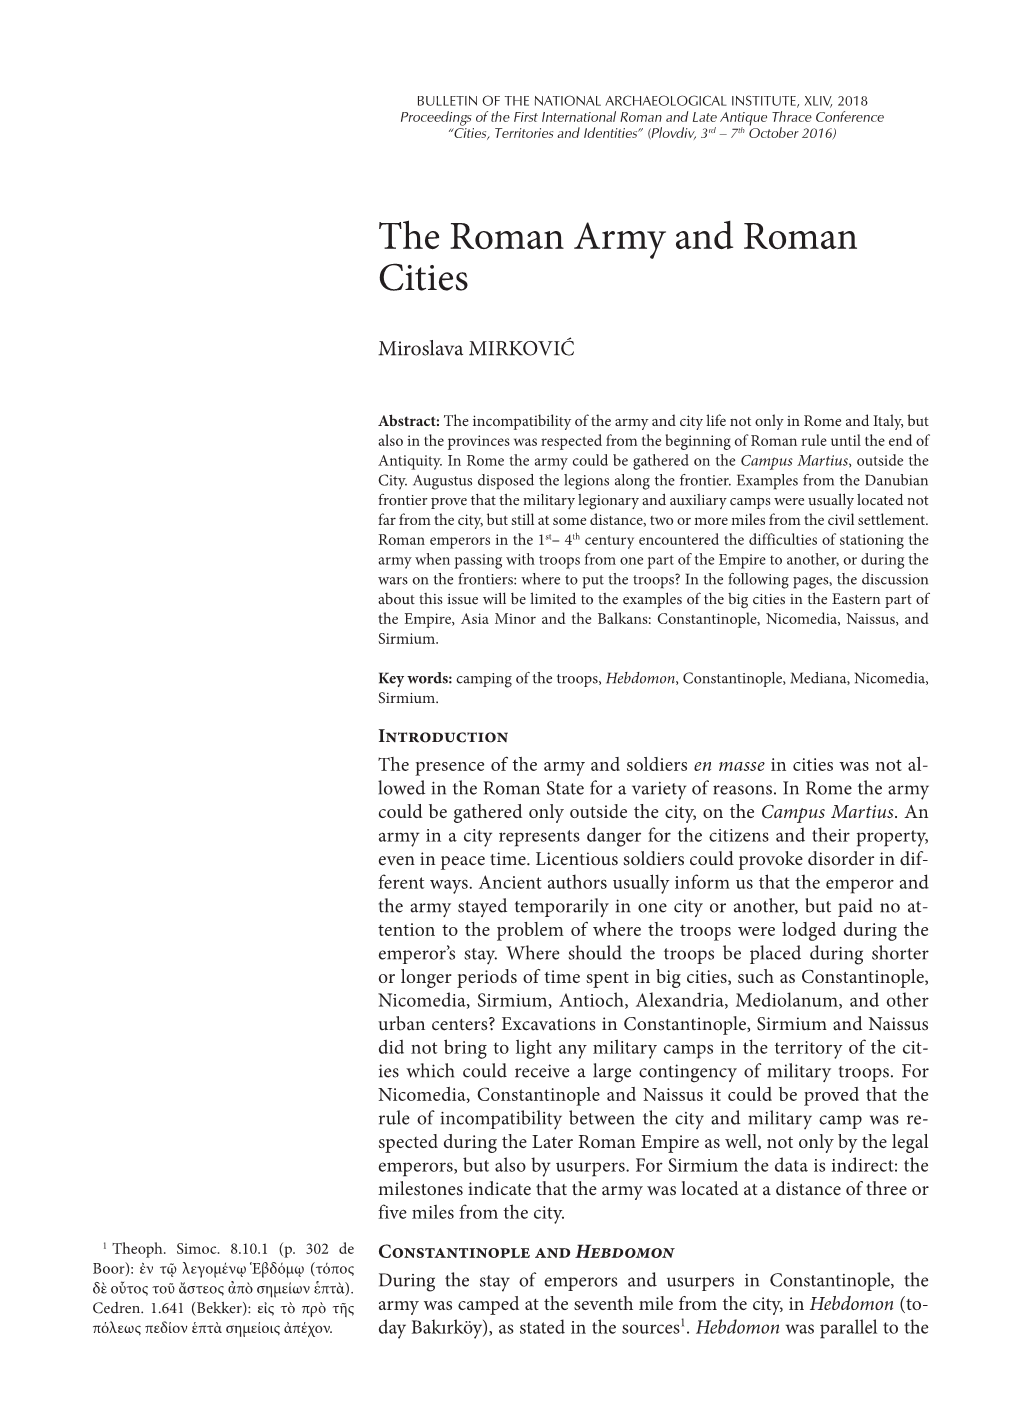 The Roman Army and Roman Cities